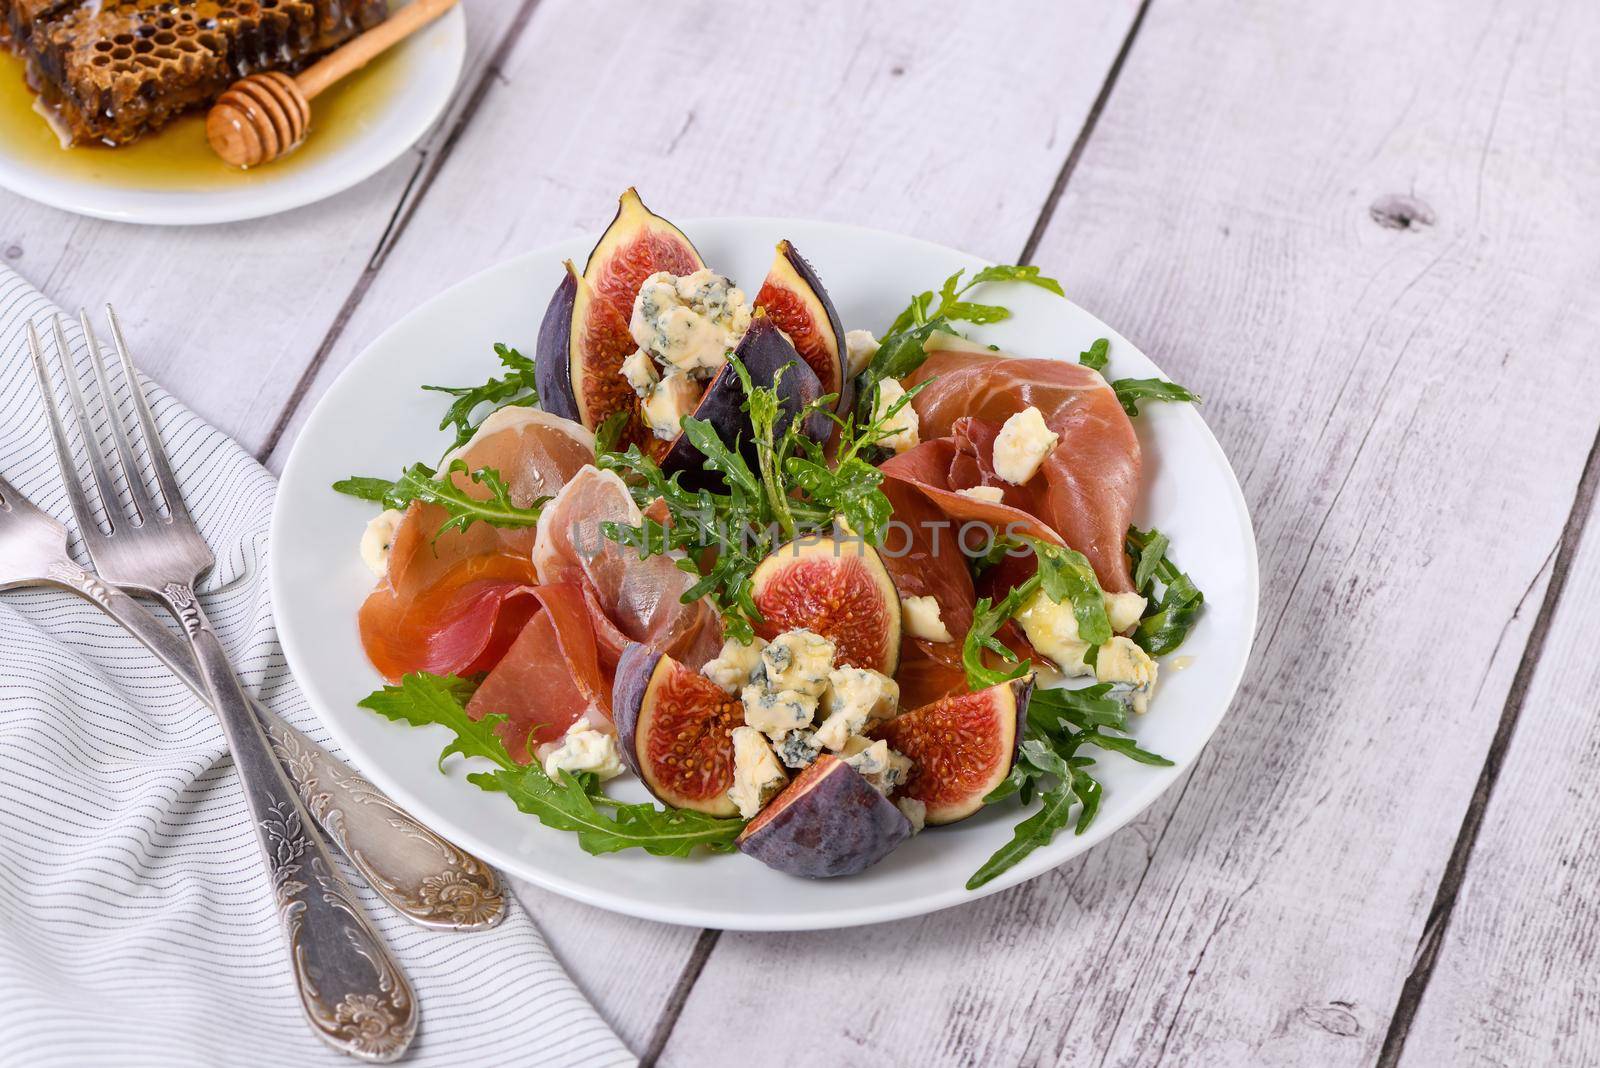 Prosciutto with figs and blue cheese by Apolonia